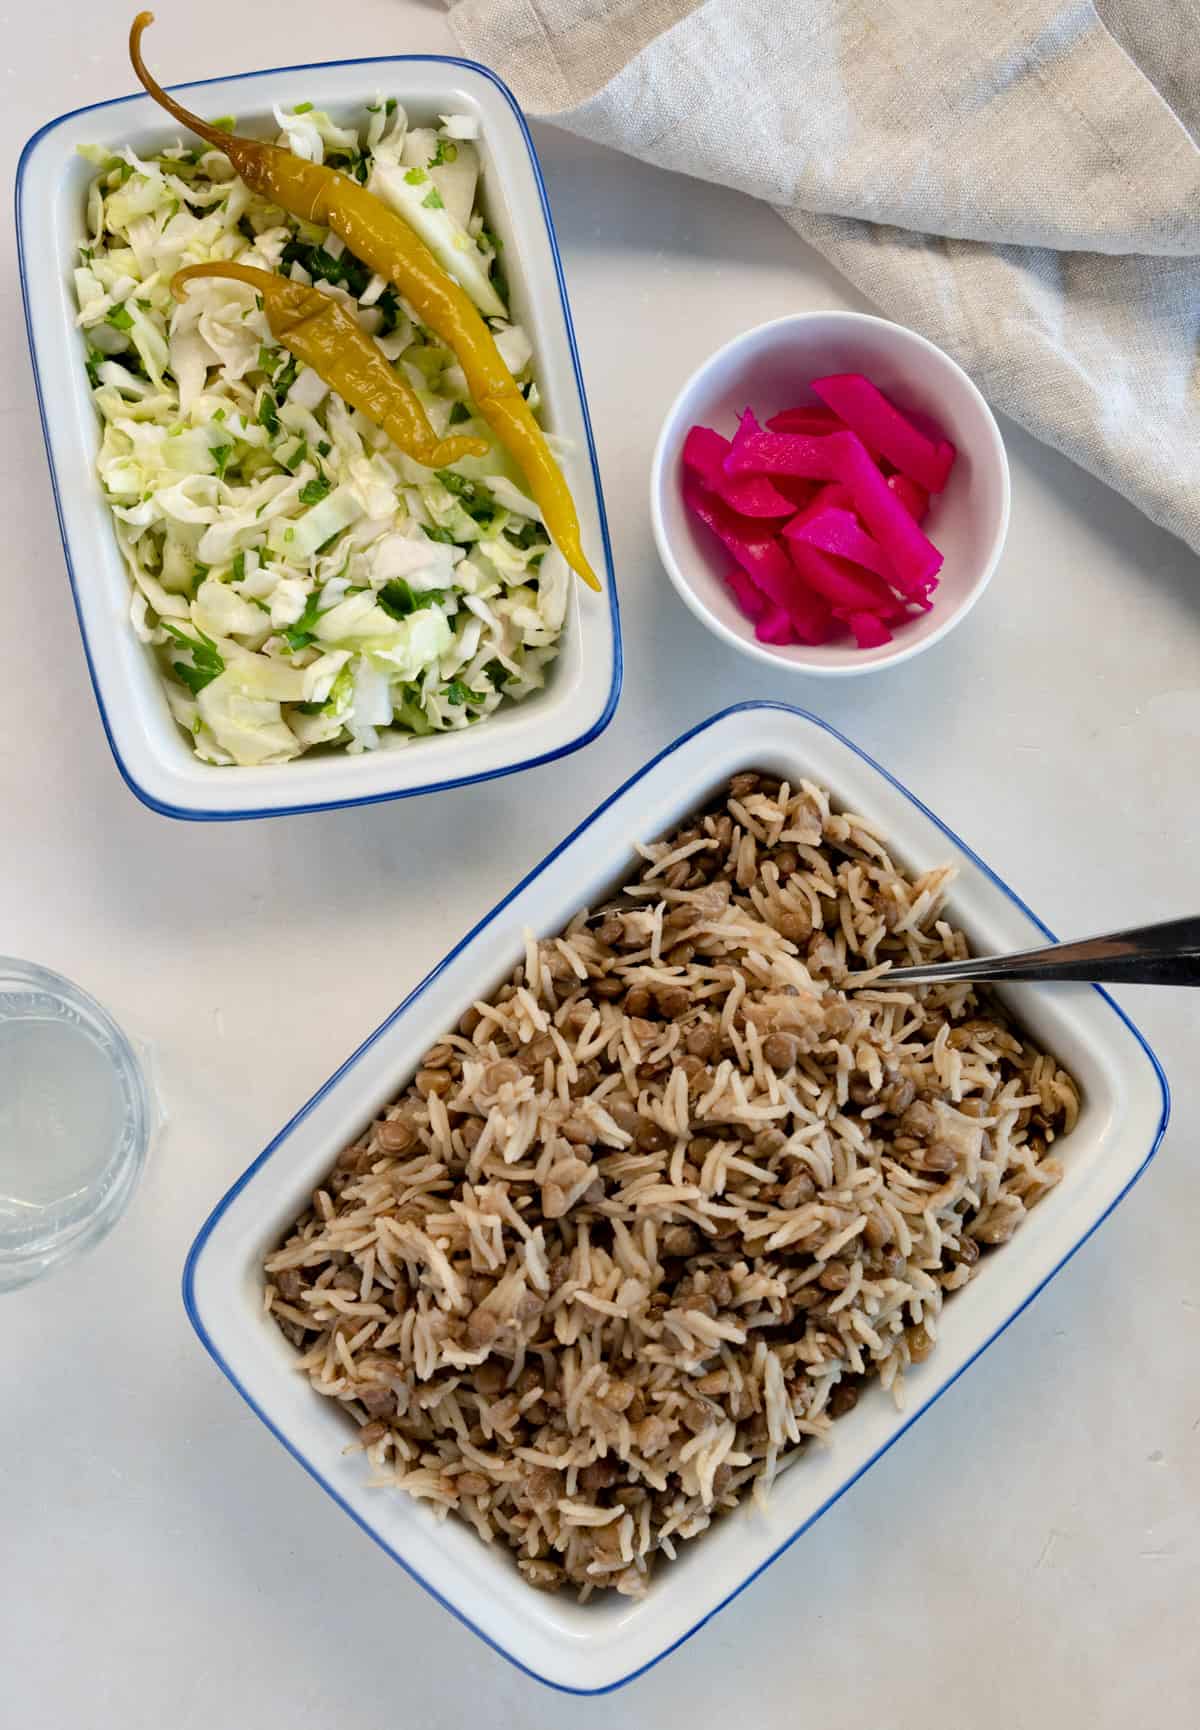 lentils and rice in a rectangular plate with a side of cabbage salad